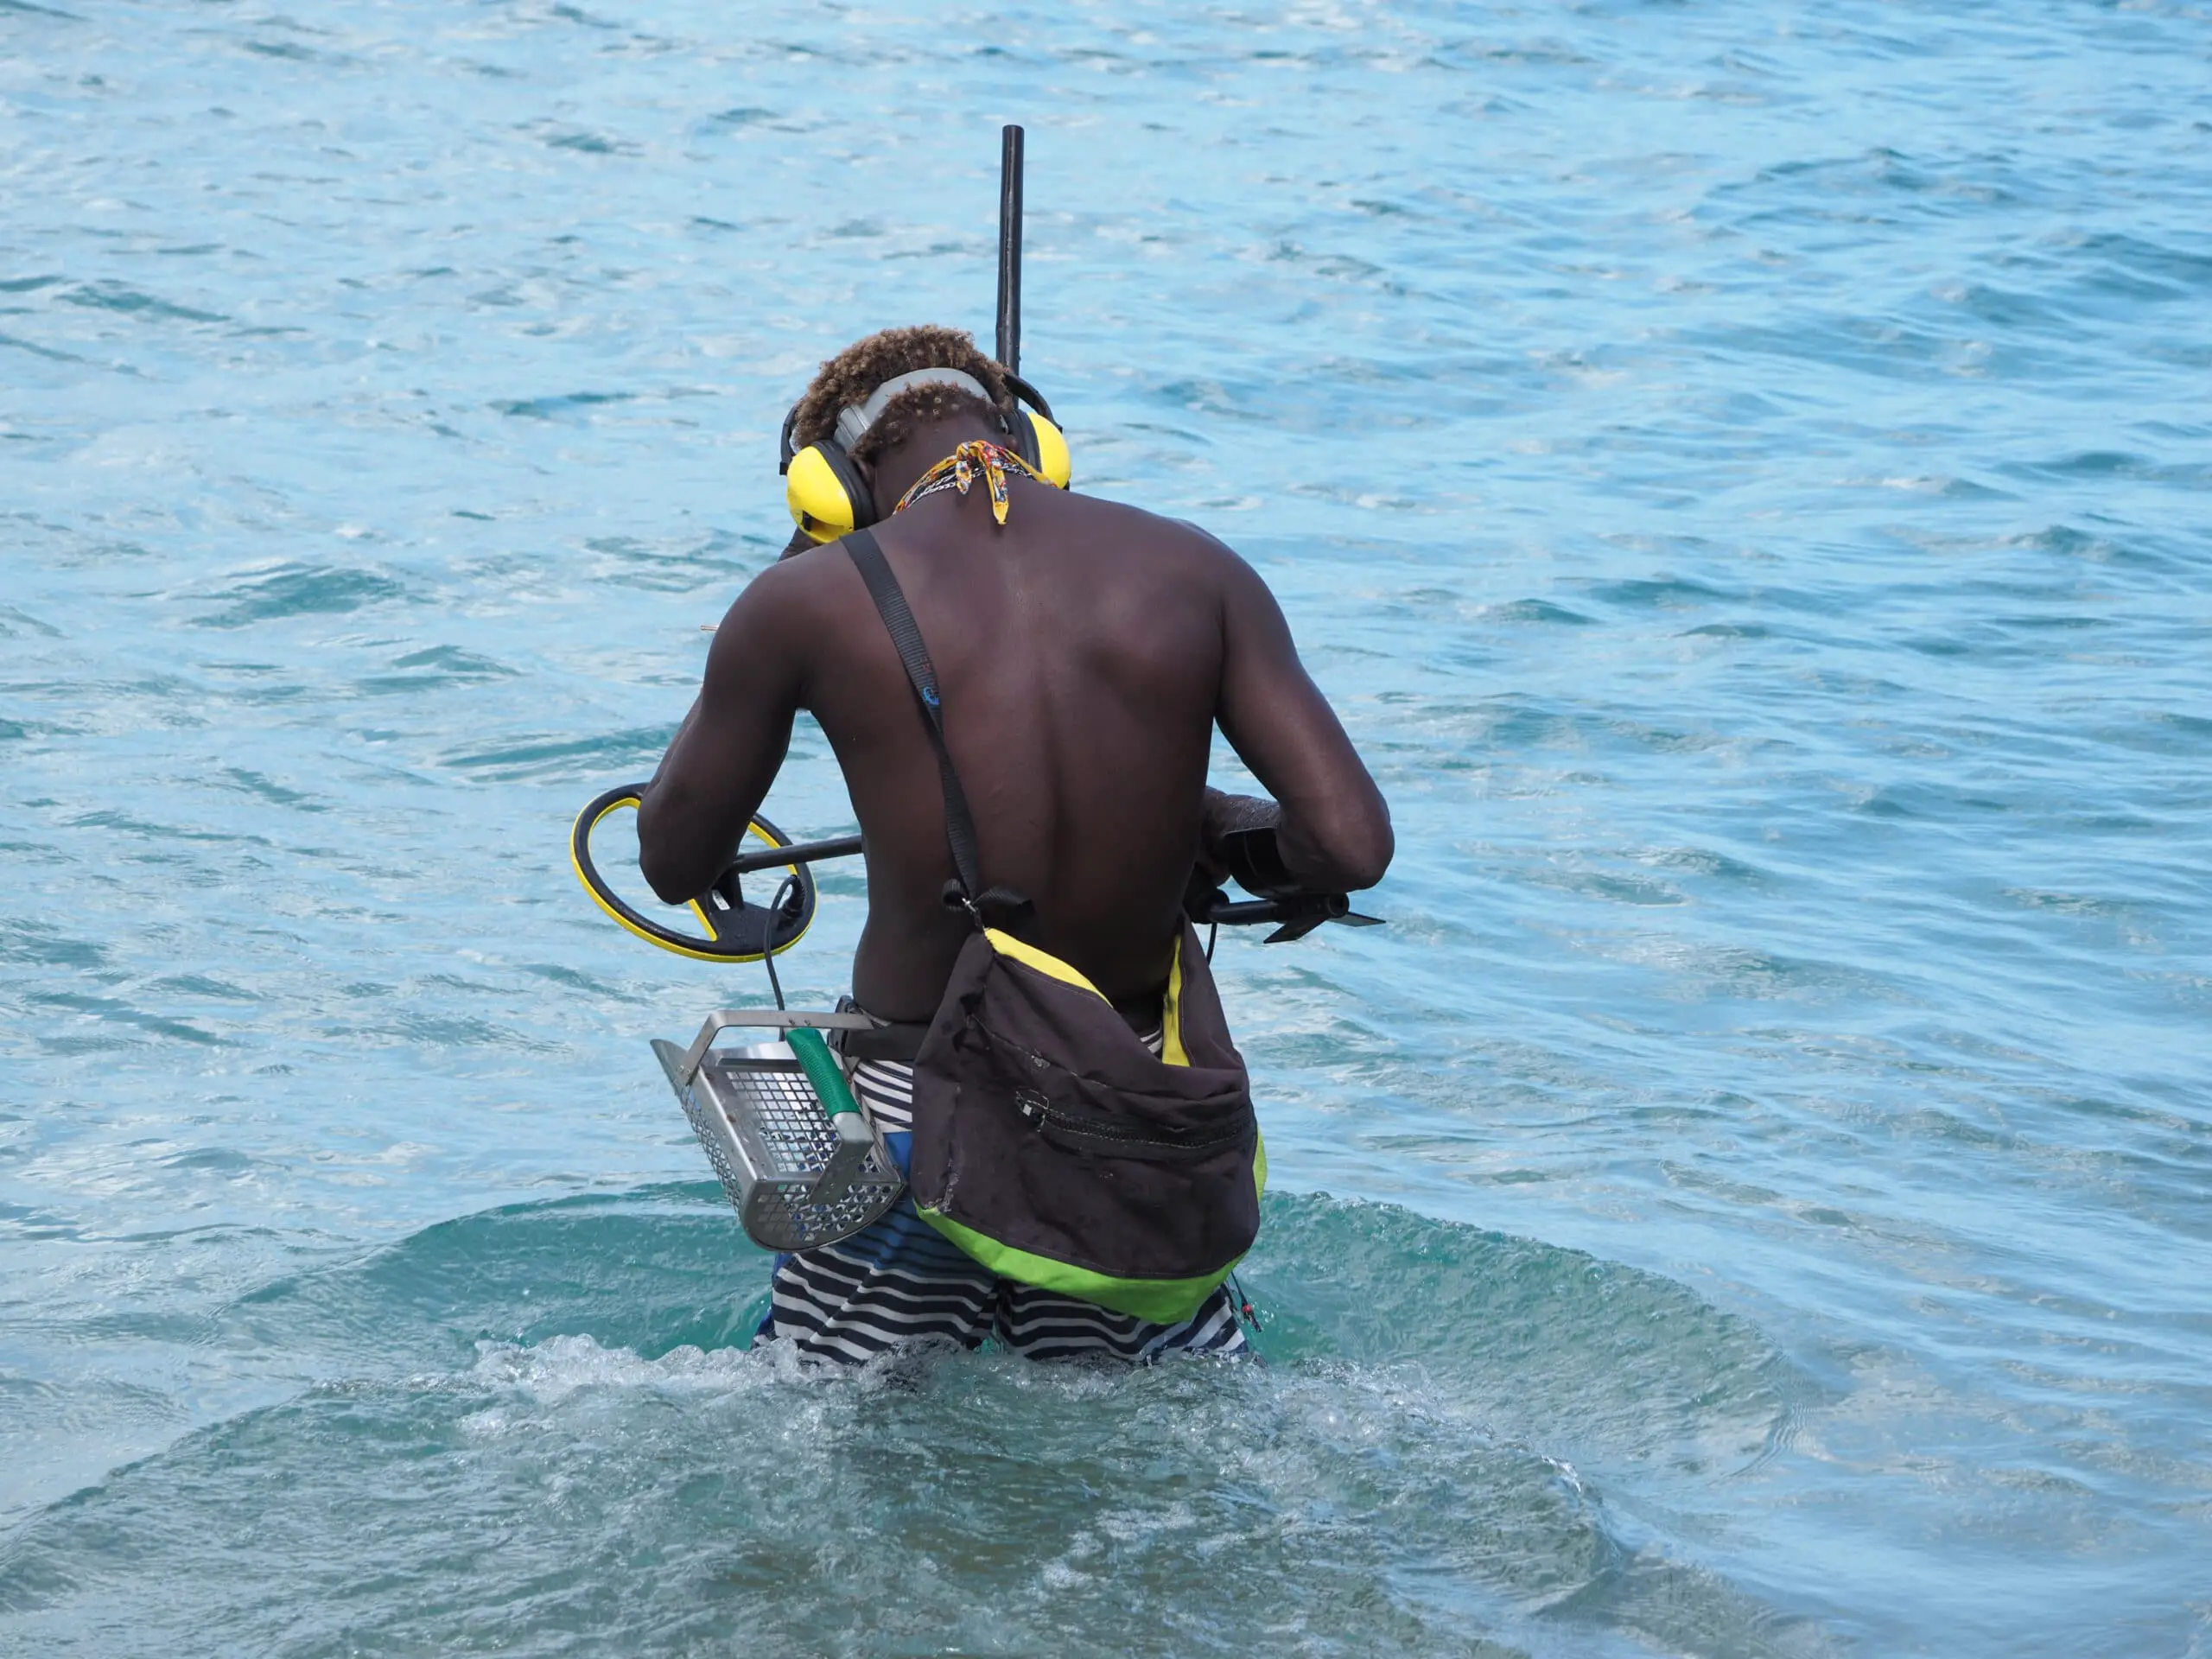 A man searches the ocean for jewels with a metal detector.